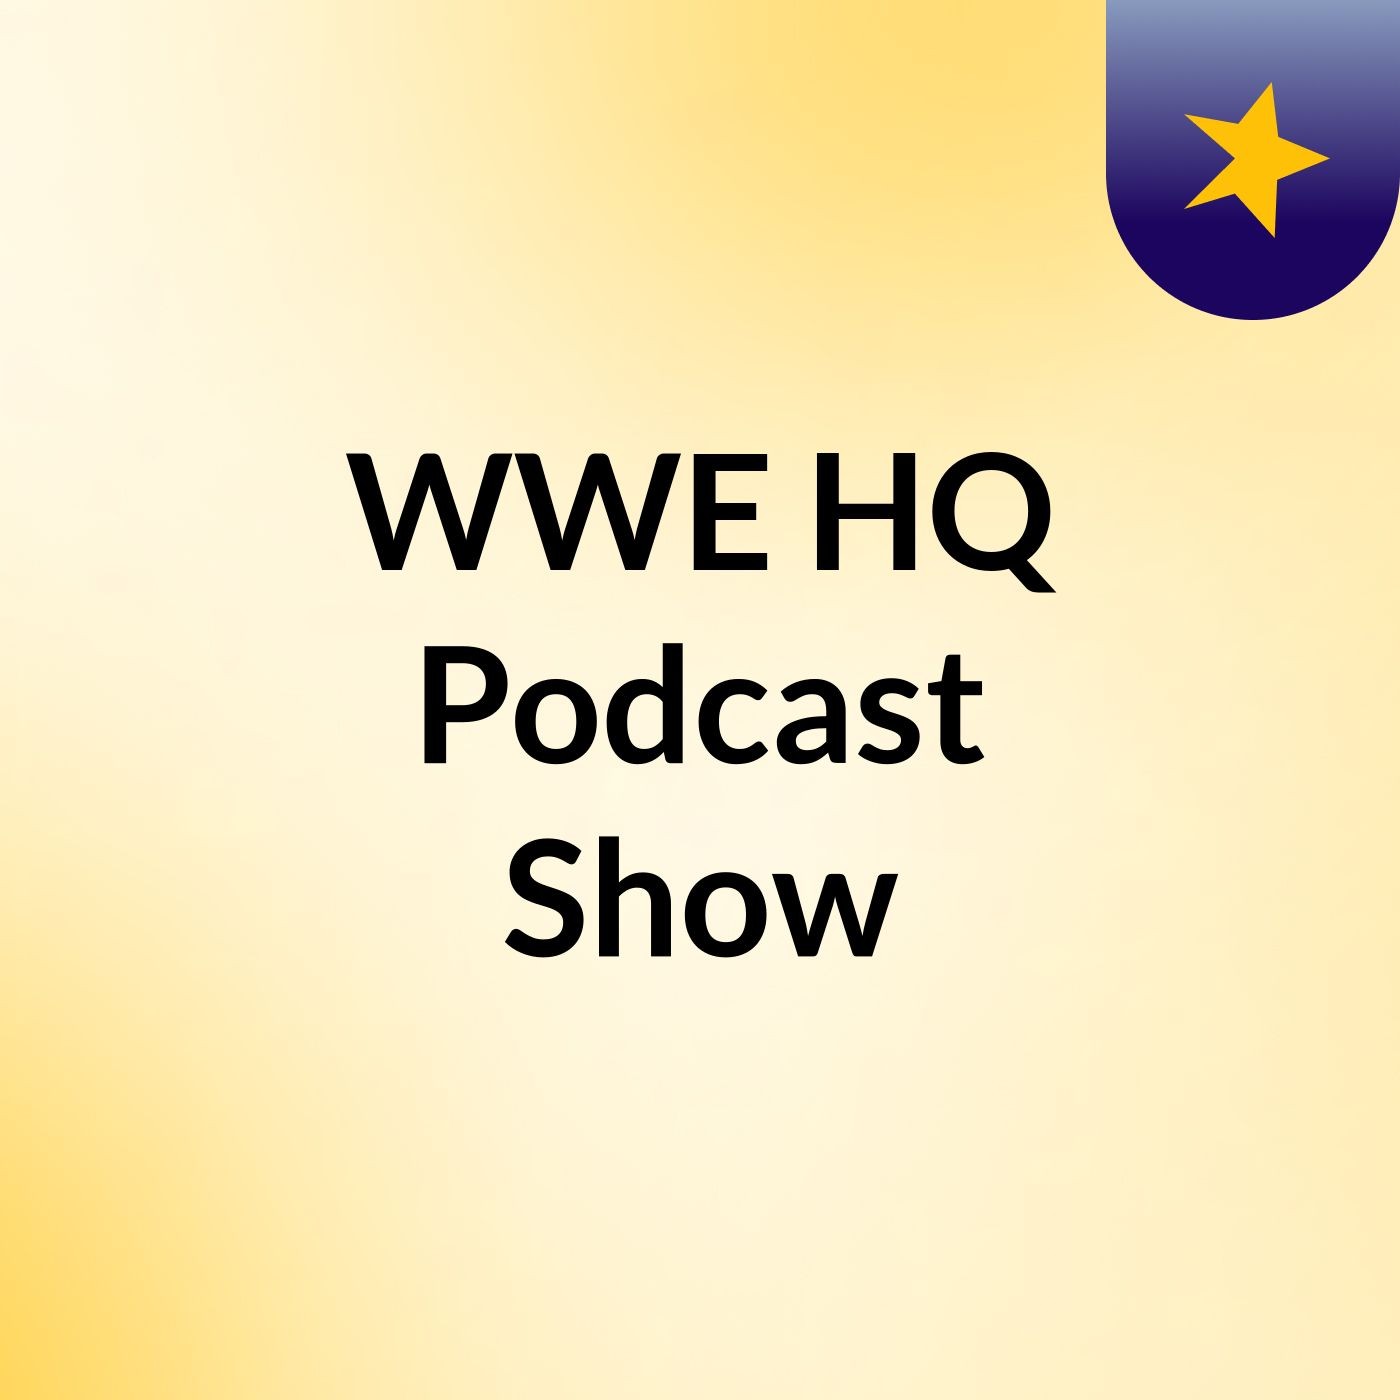 WWE HQ Podcast Show